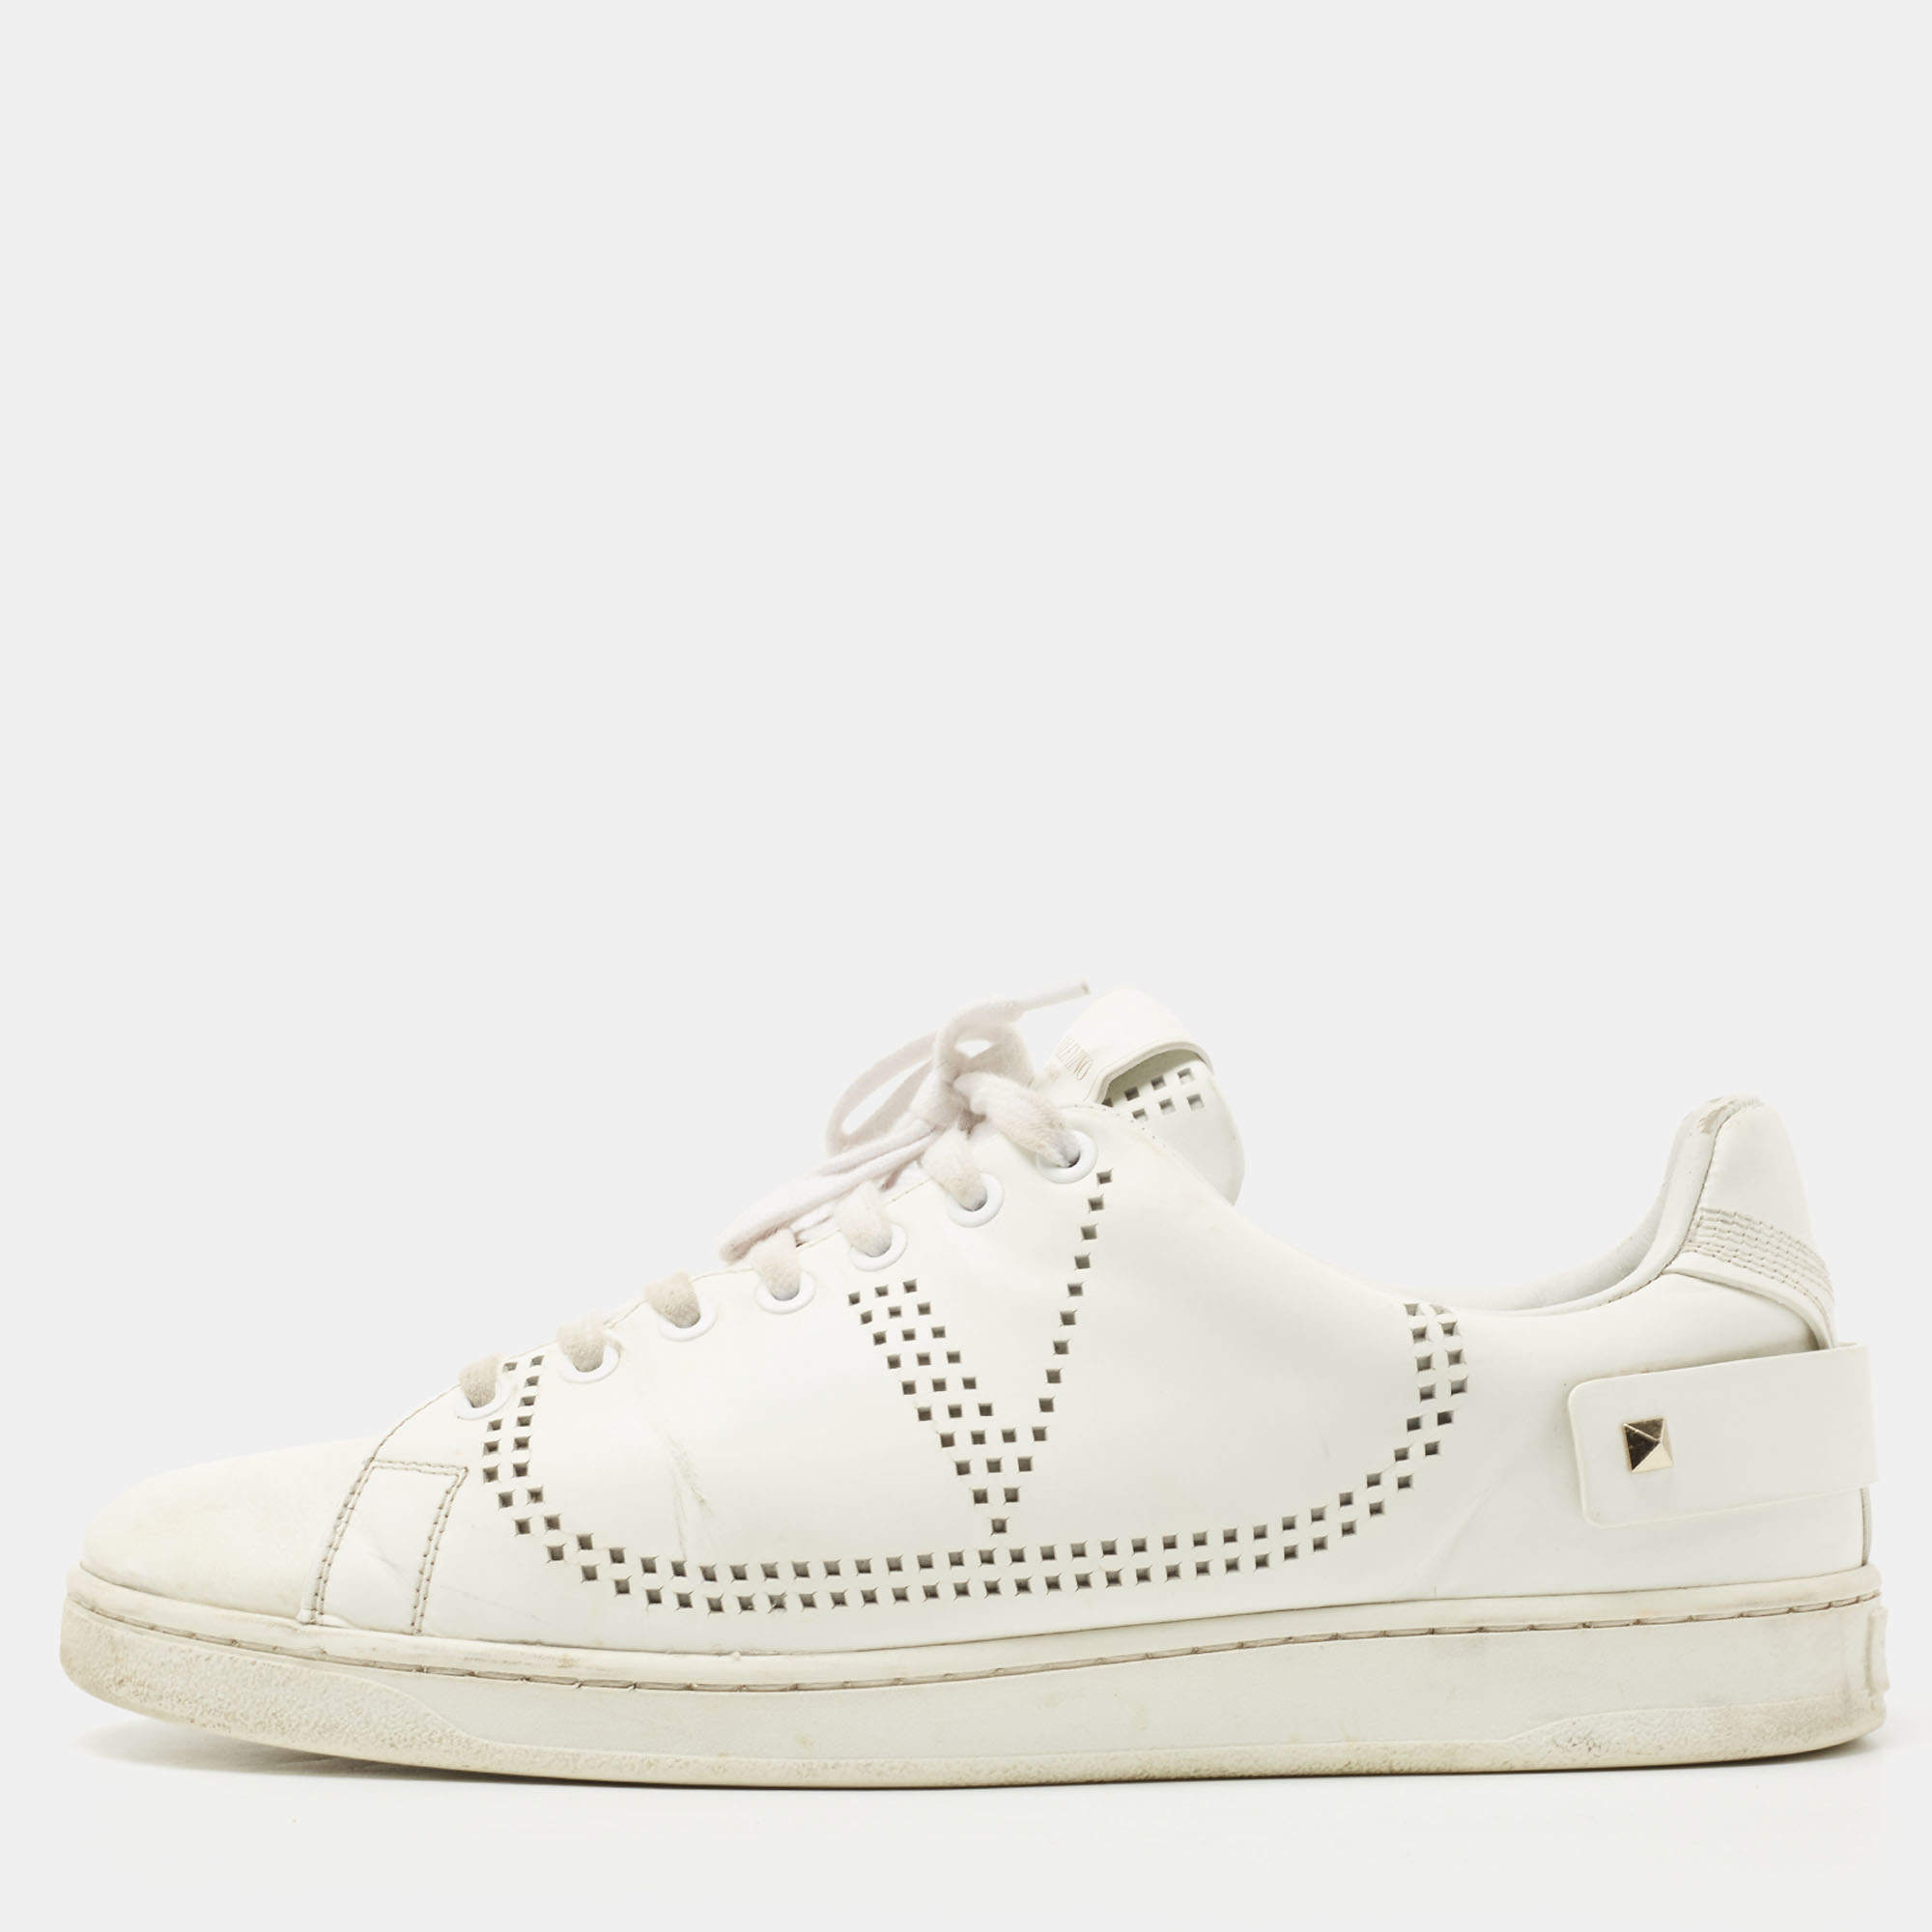 Valentino White Leather Becknet Sneakers Size 42.5 